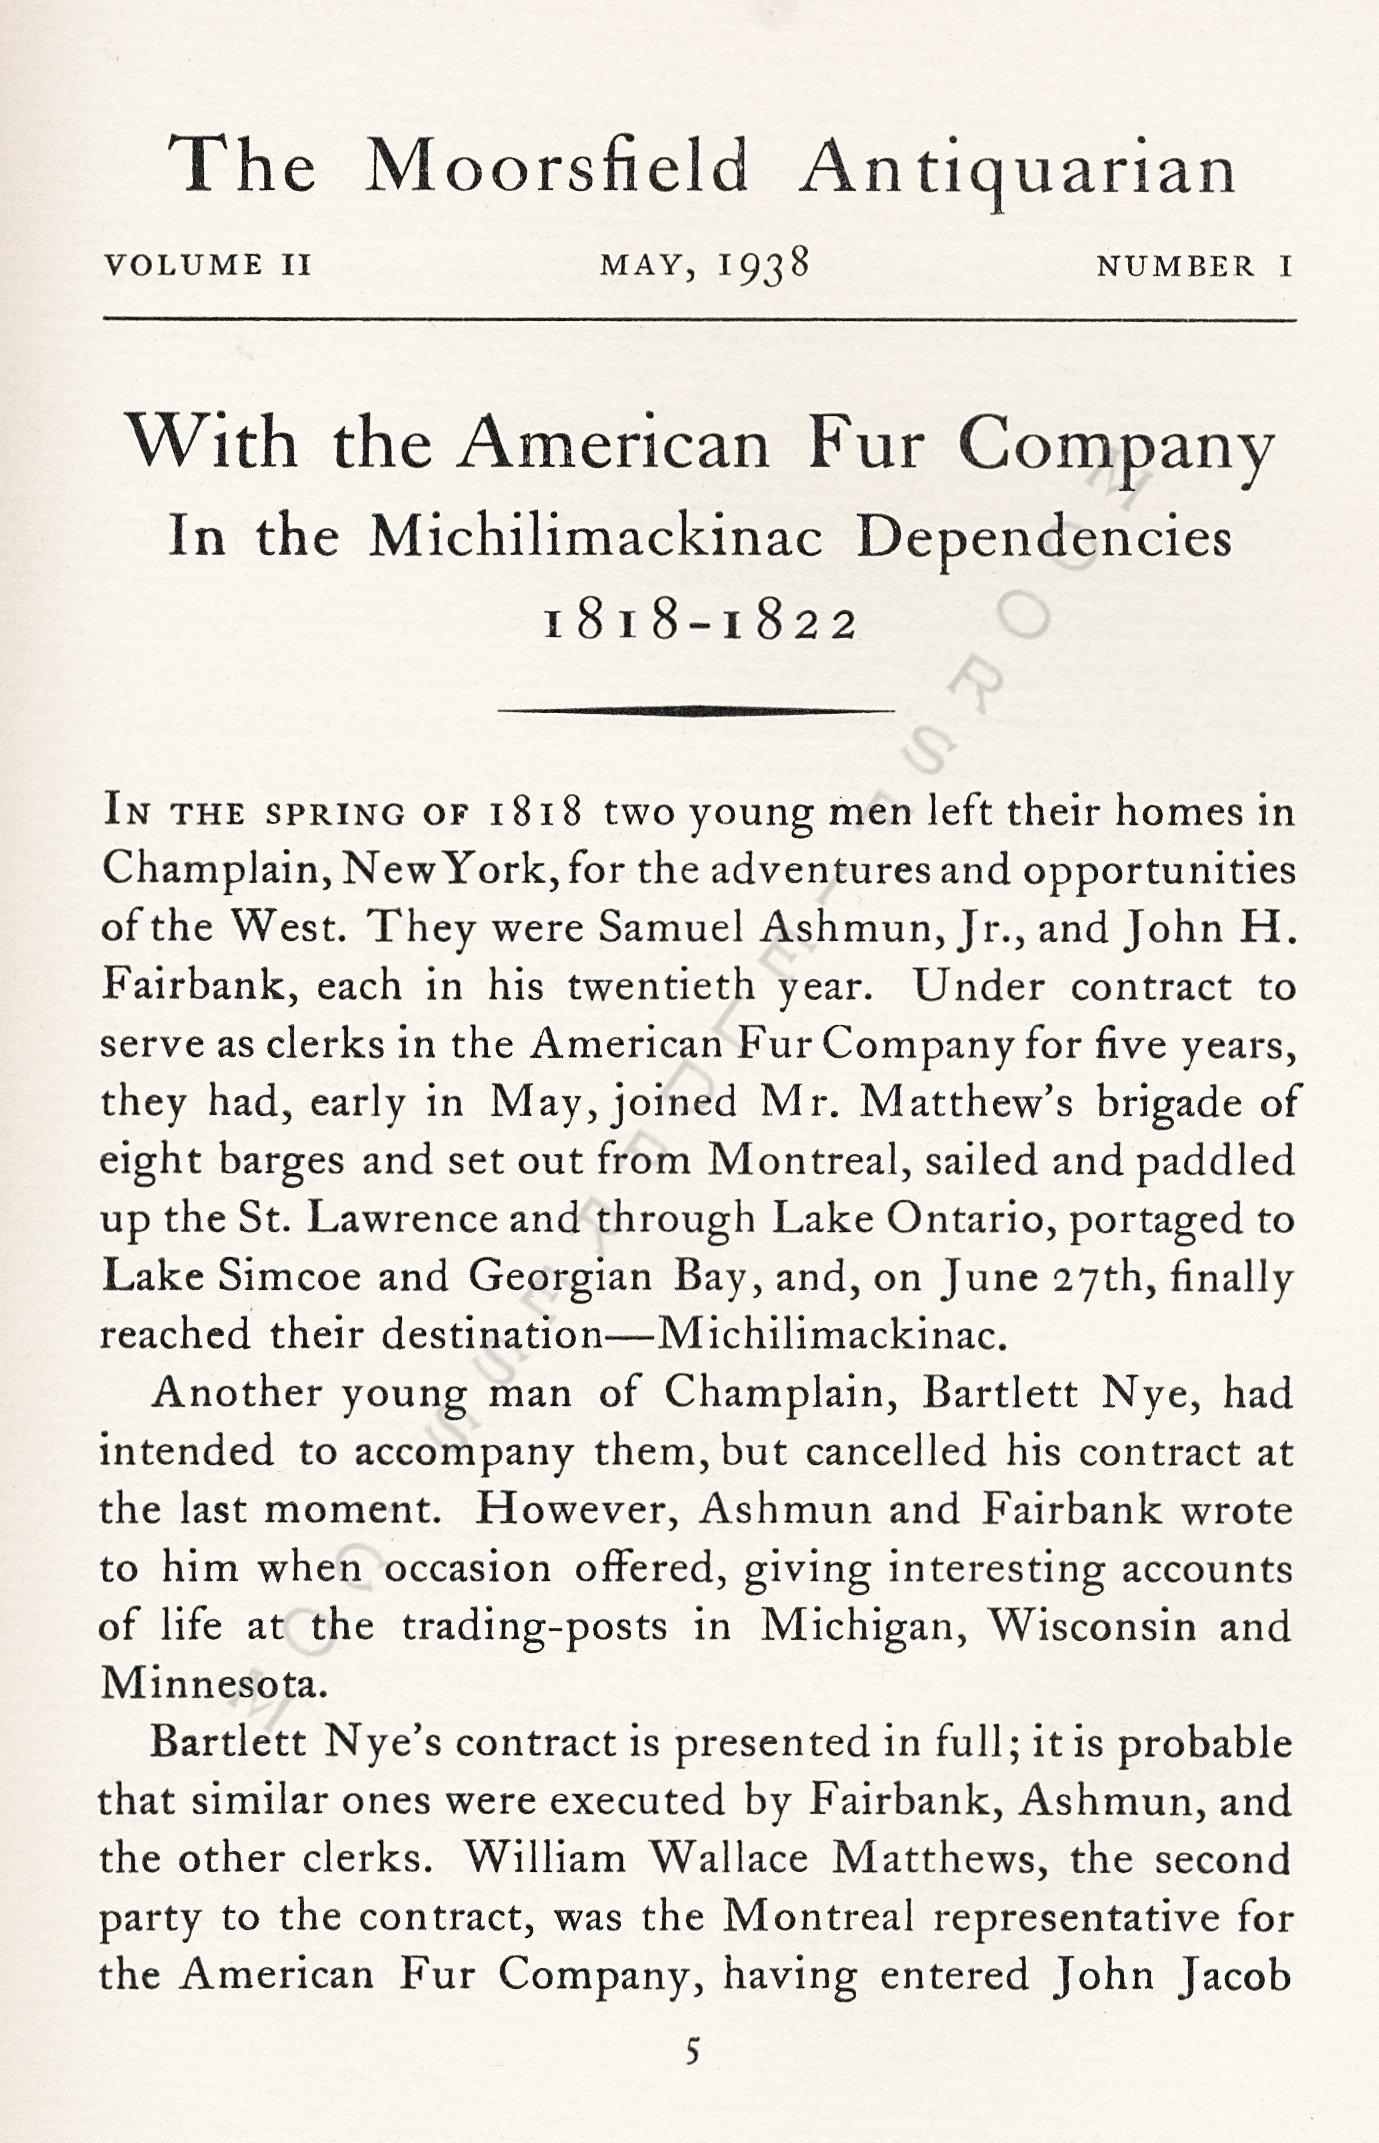 With the
                      American Fur Company in the Michilimackinac
                      Dependencies 1818-1822